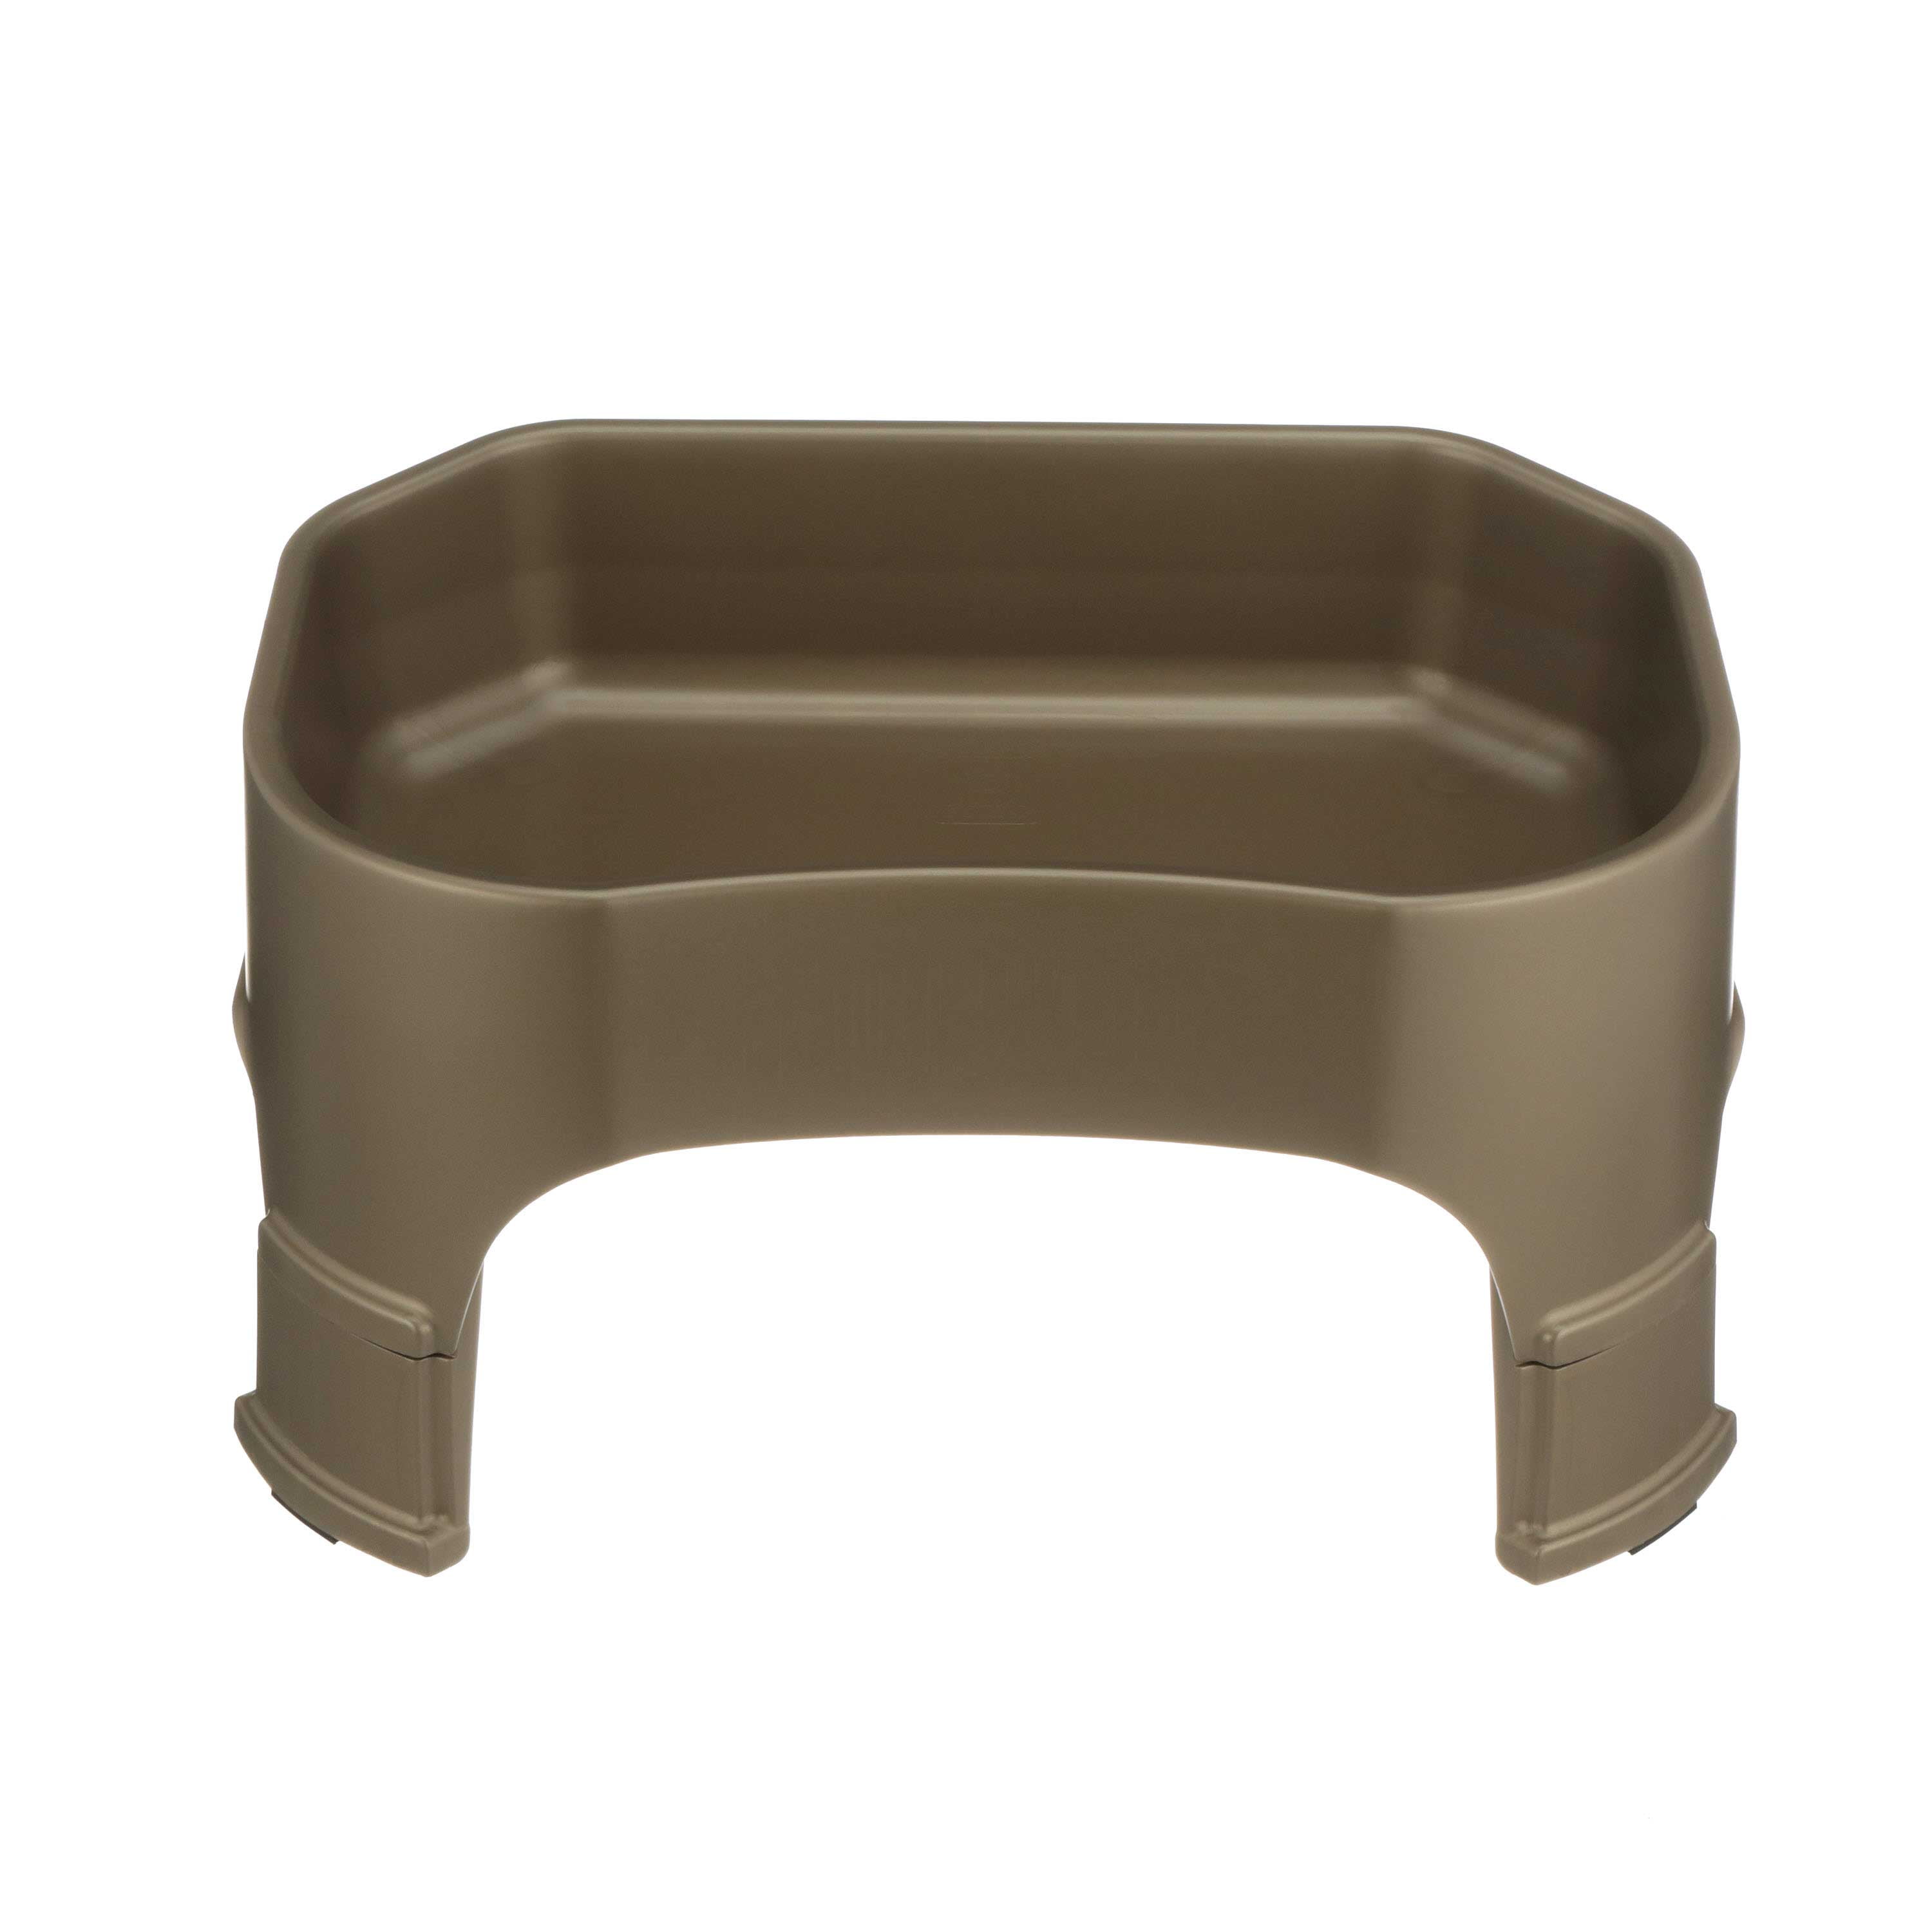 Neater Pets Little Big Bowl for Small Dogs - Plastic Trough Style Food or  Water Bowl for Use Indoors or Outdoors, Gunmetal, 8 Cups (64 Oz.) 